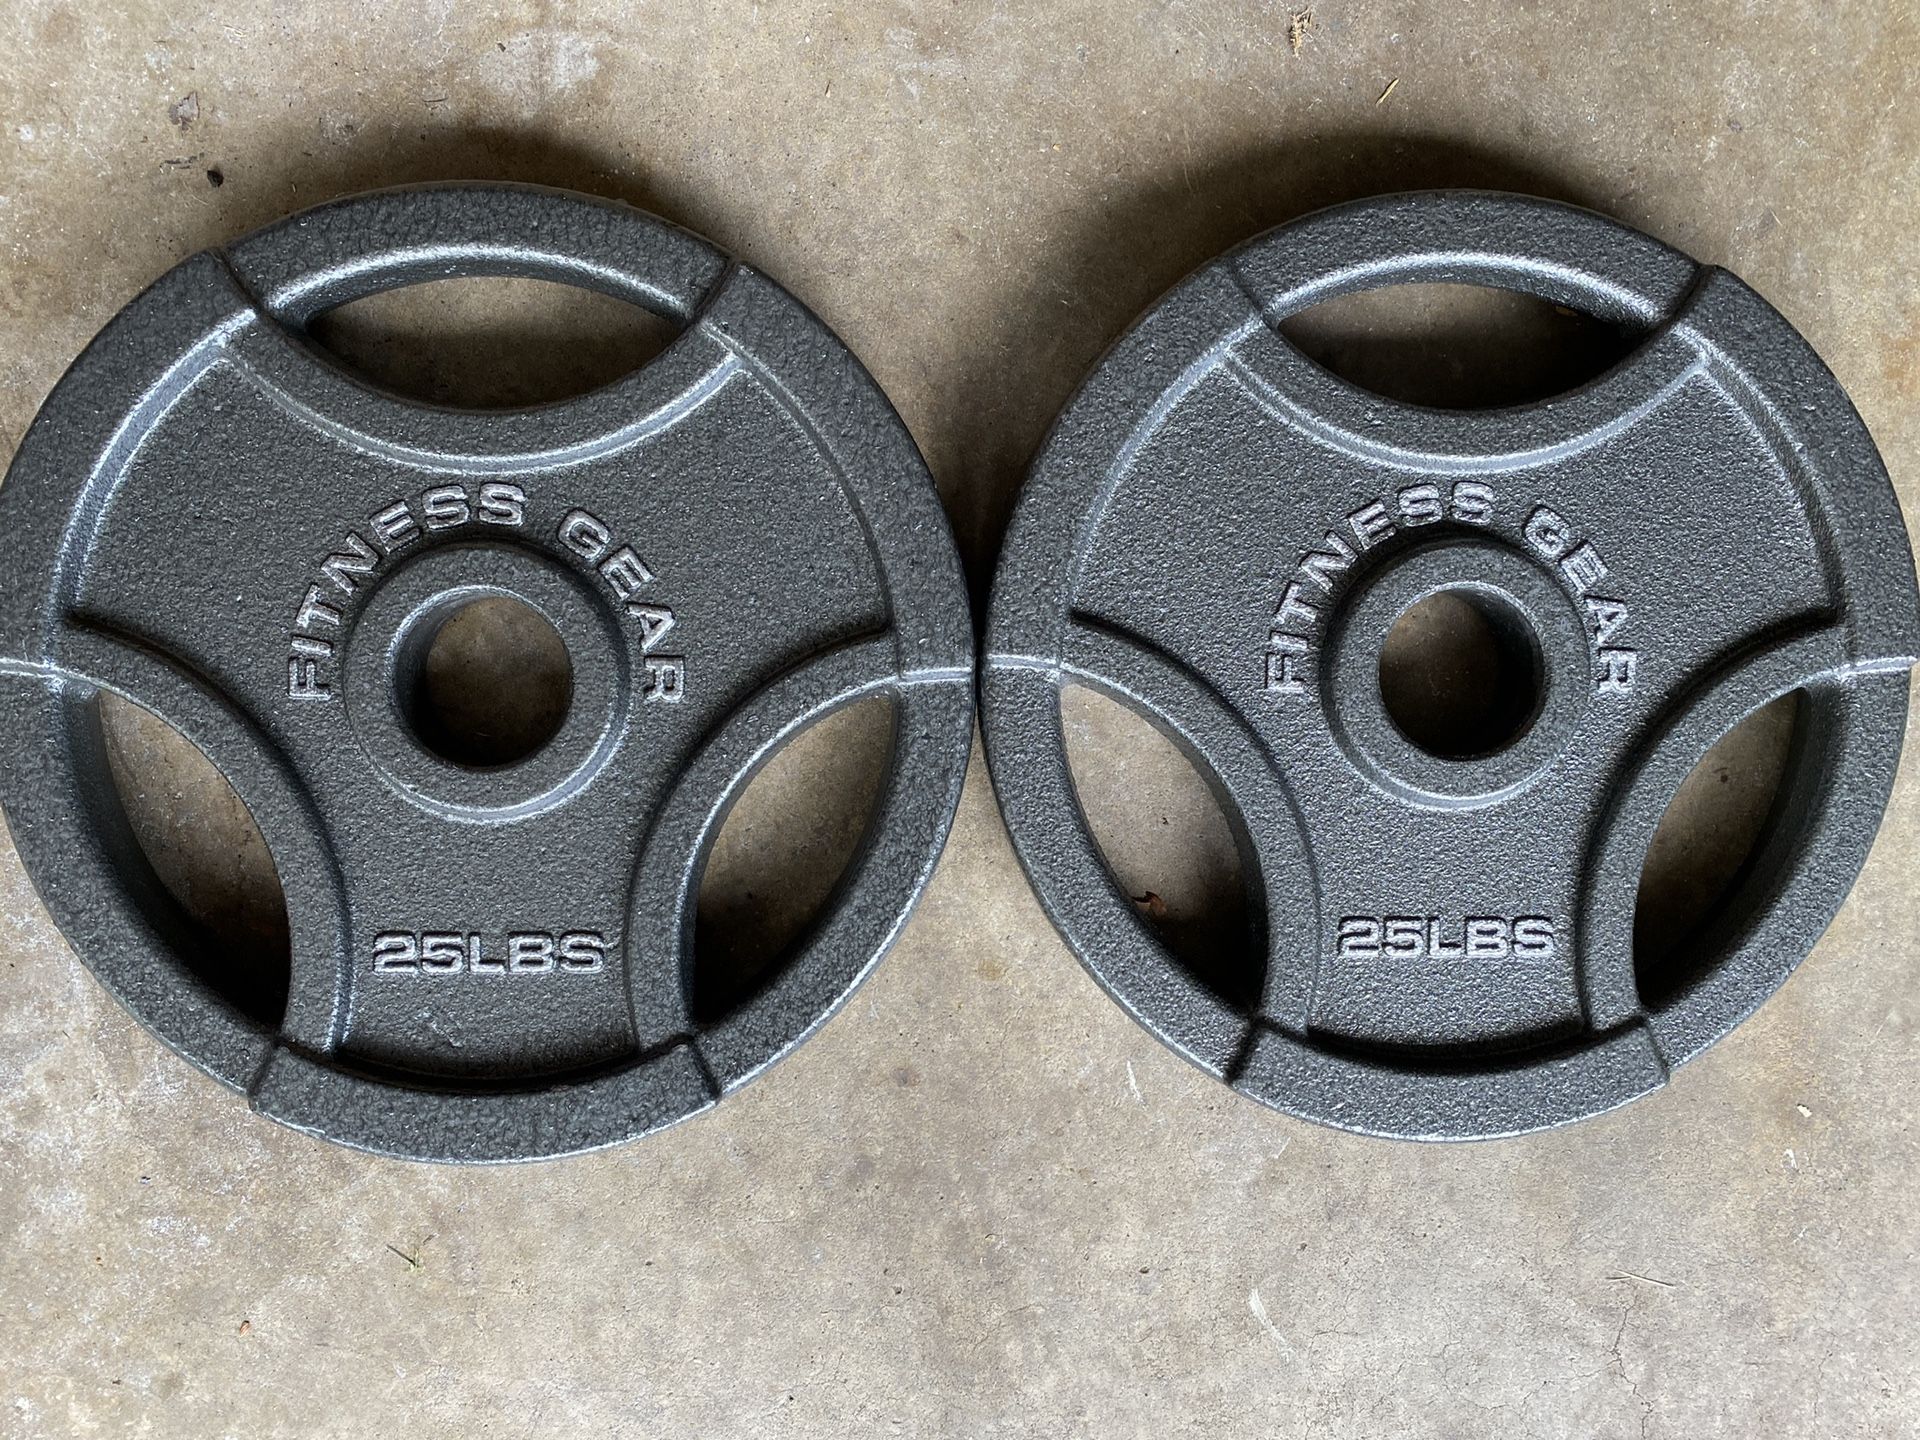 25 lb Olympic Weight Plates